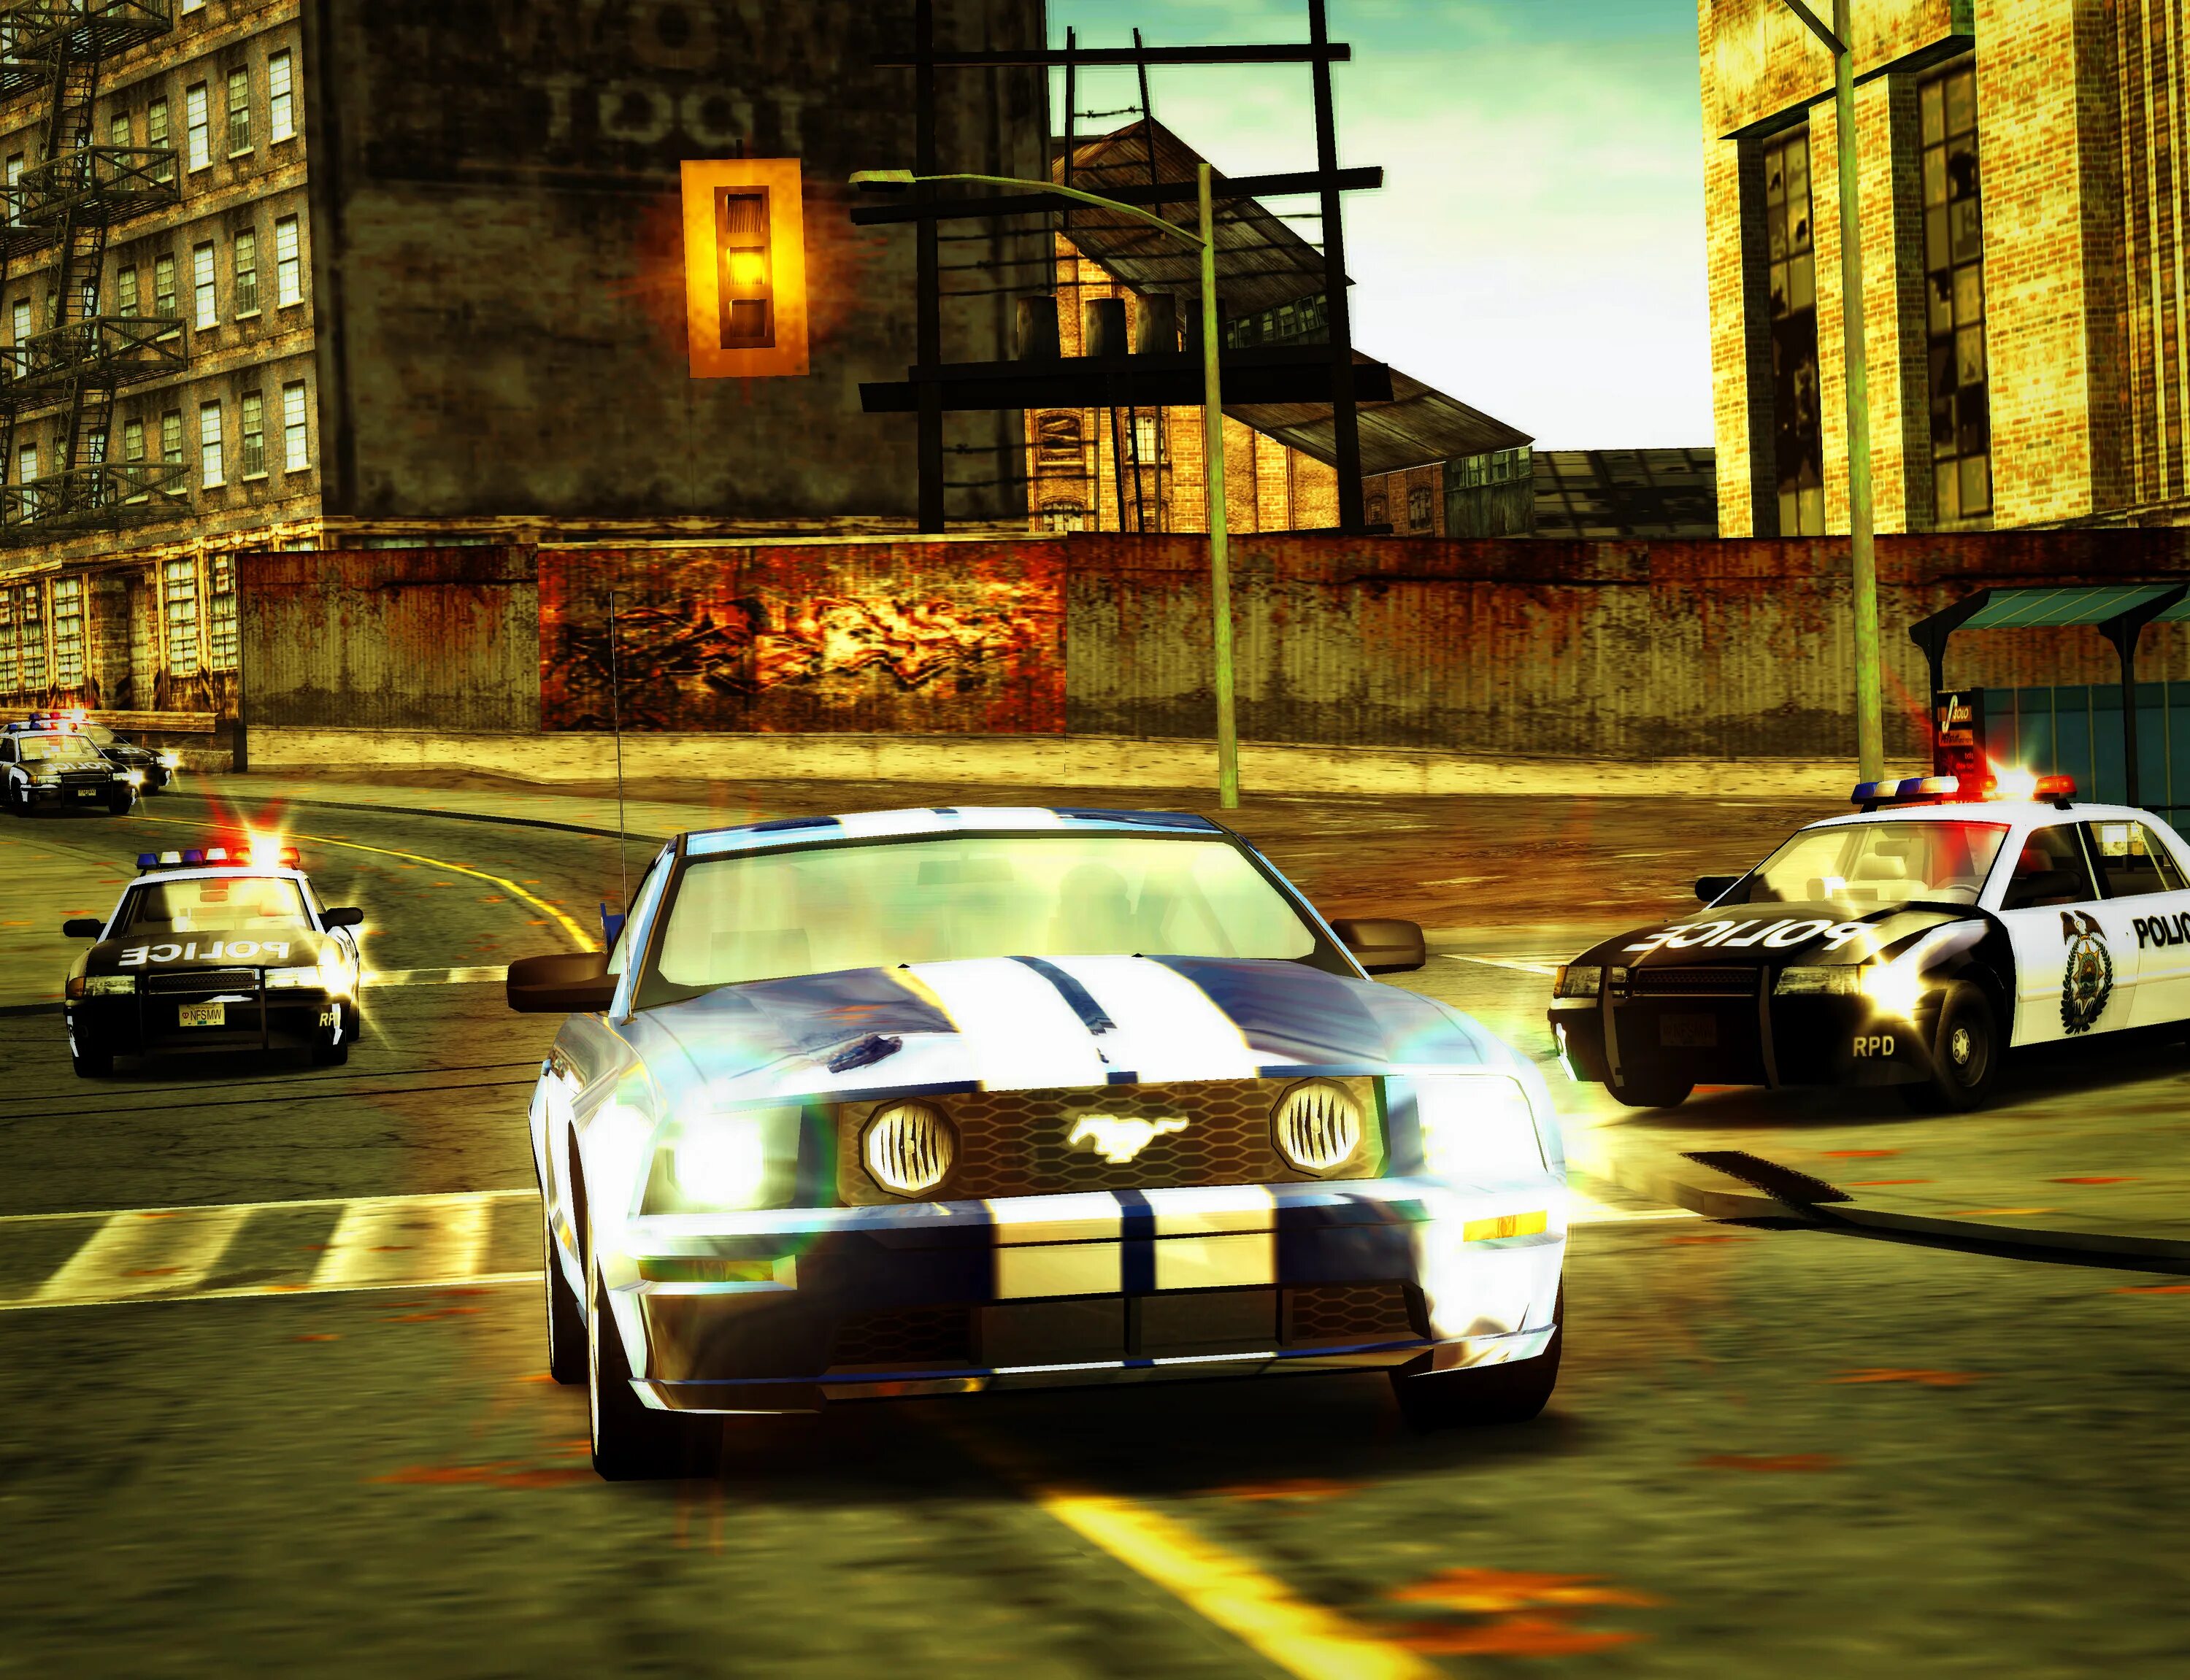 Need for Speed most wanted 2005. Нфс МВ 2005. Гонки NFS most wanted. Гонки NFS most wanted 2005. Гонки игры 2 5